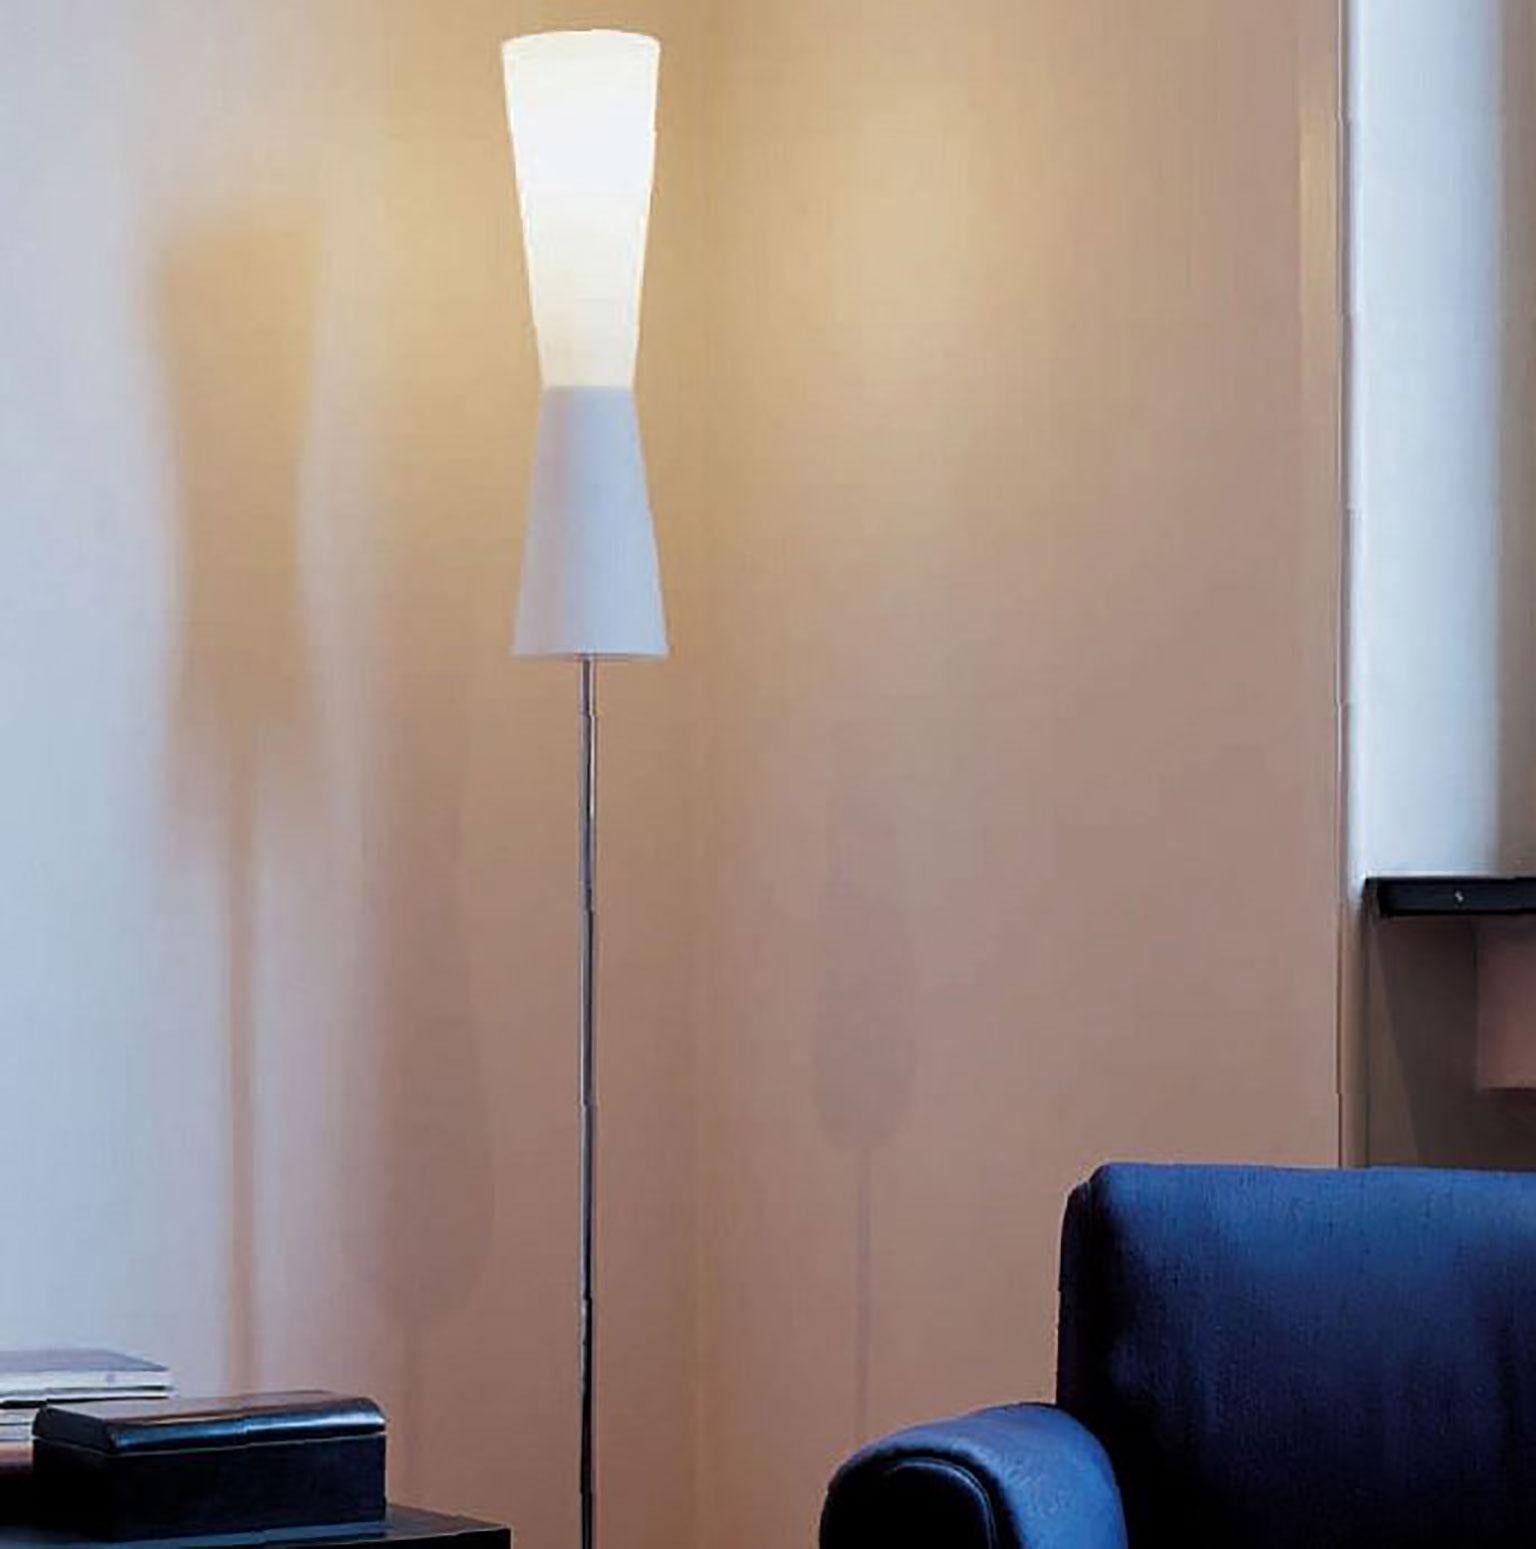 Lu-Lu floor lamp by Stefano Casciani for Oluce. This elegant floor lamp has a Murano glass diffuser with a brushed metal base, designed by Stefano Casciani. The design is simple and primitive, filtered perhaps, through cubist suggestion. The stand